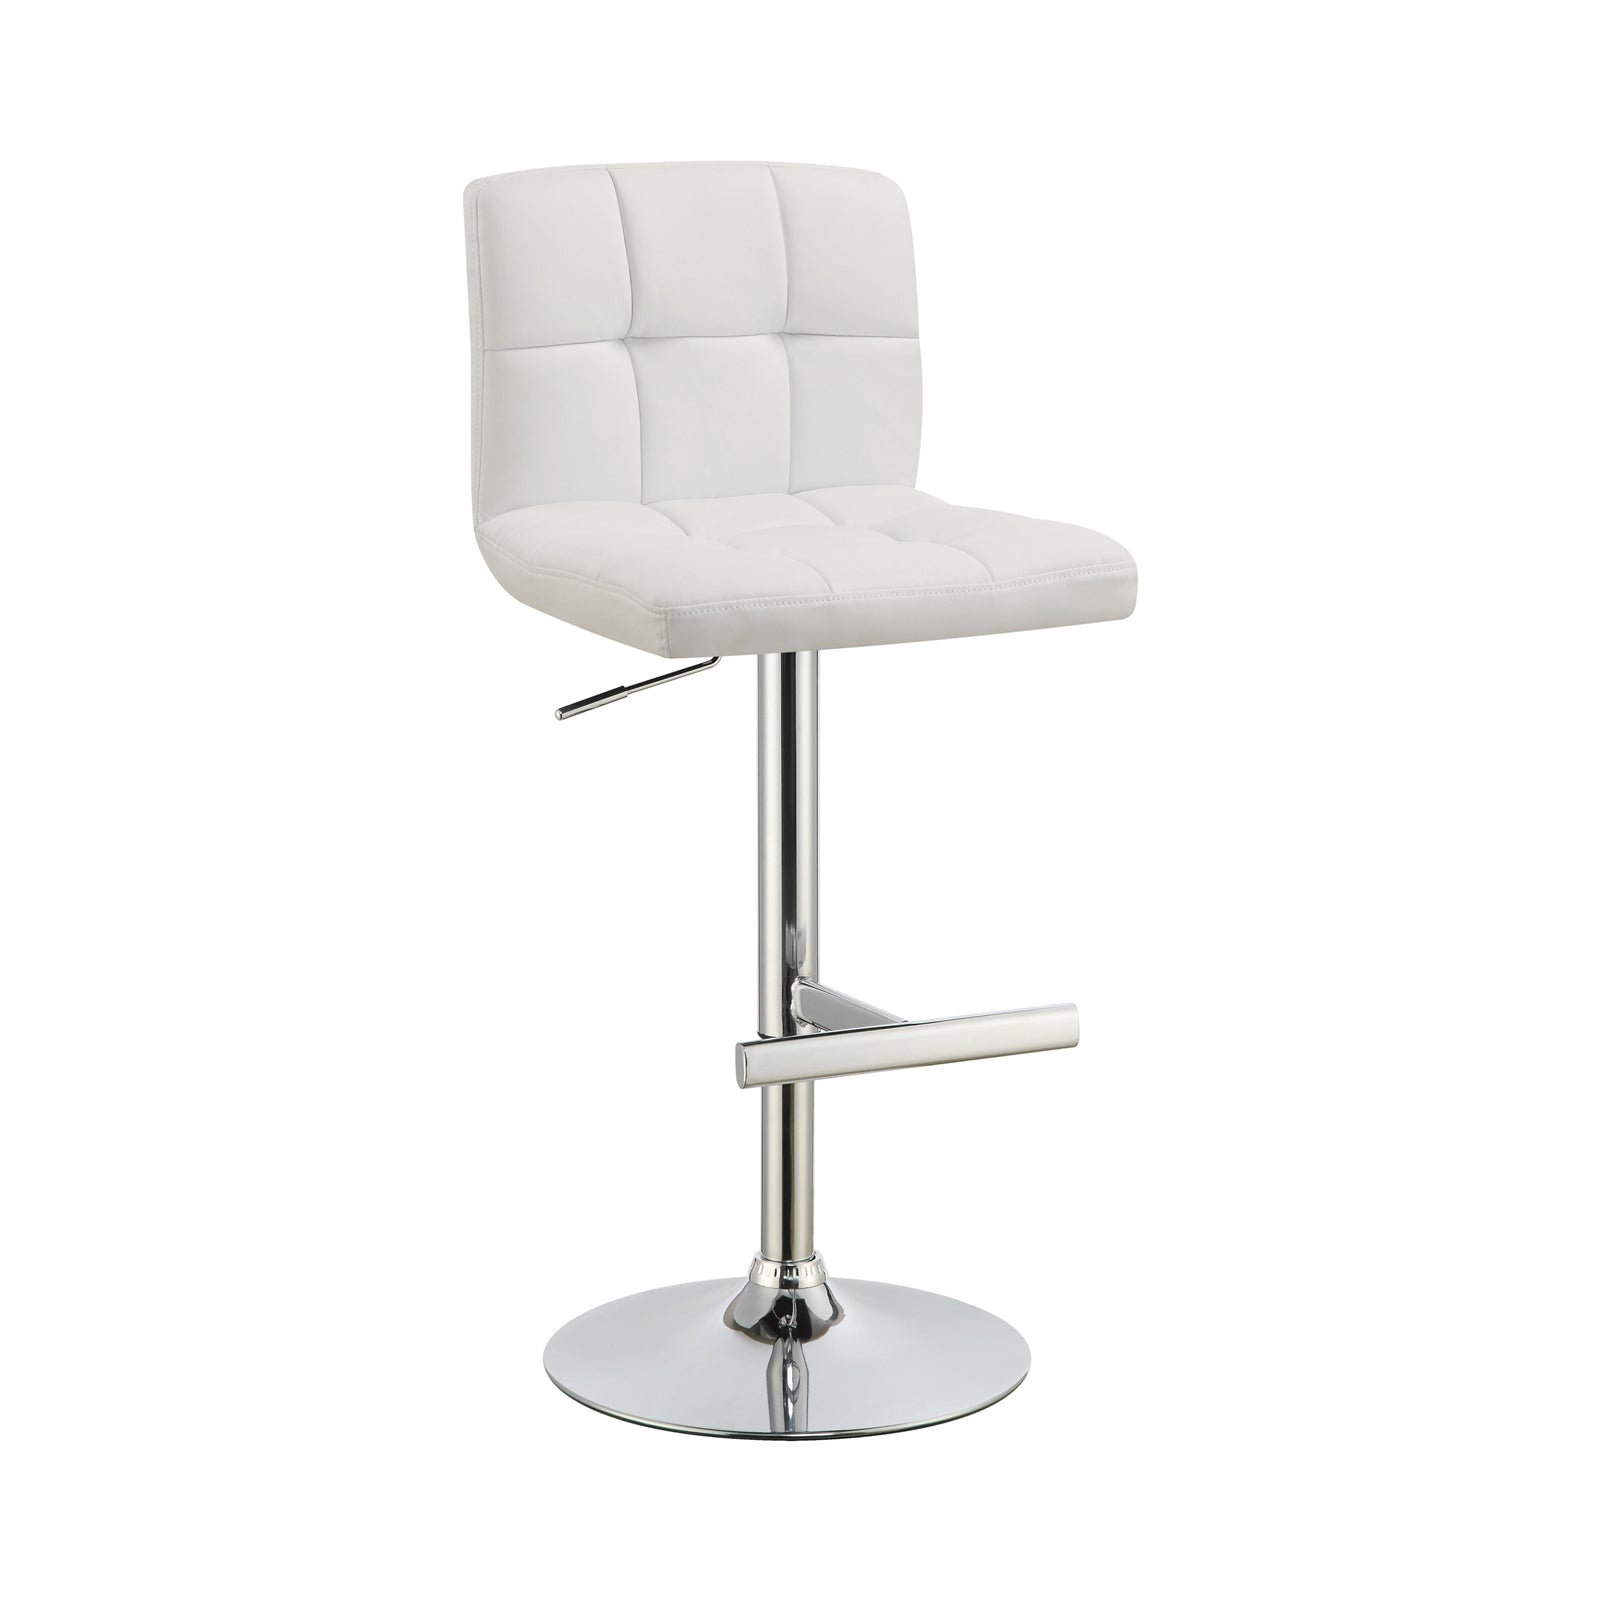 Adjustable Height Bar Stools Chrome And White Set Of 2